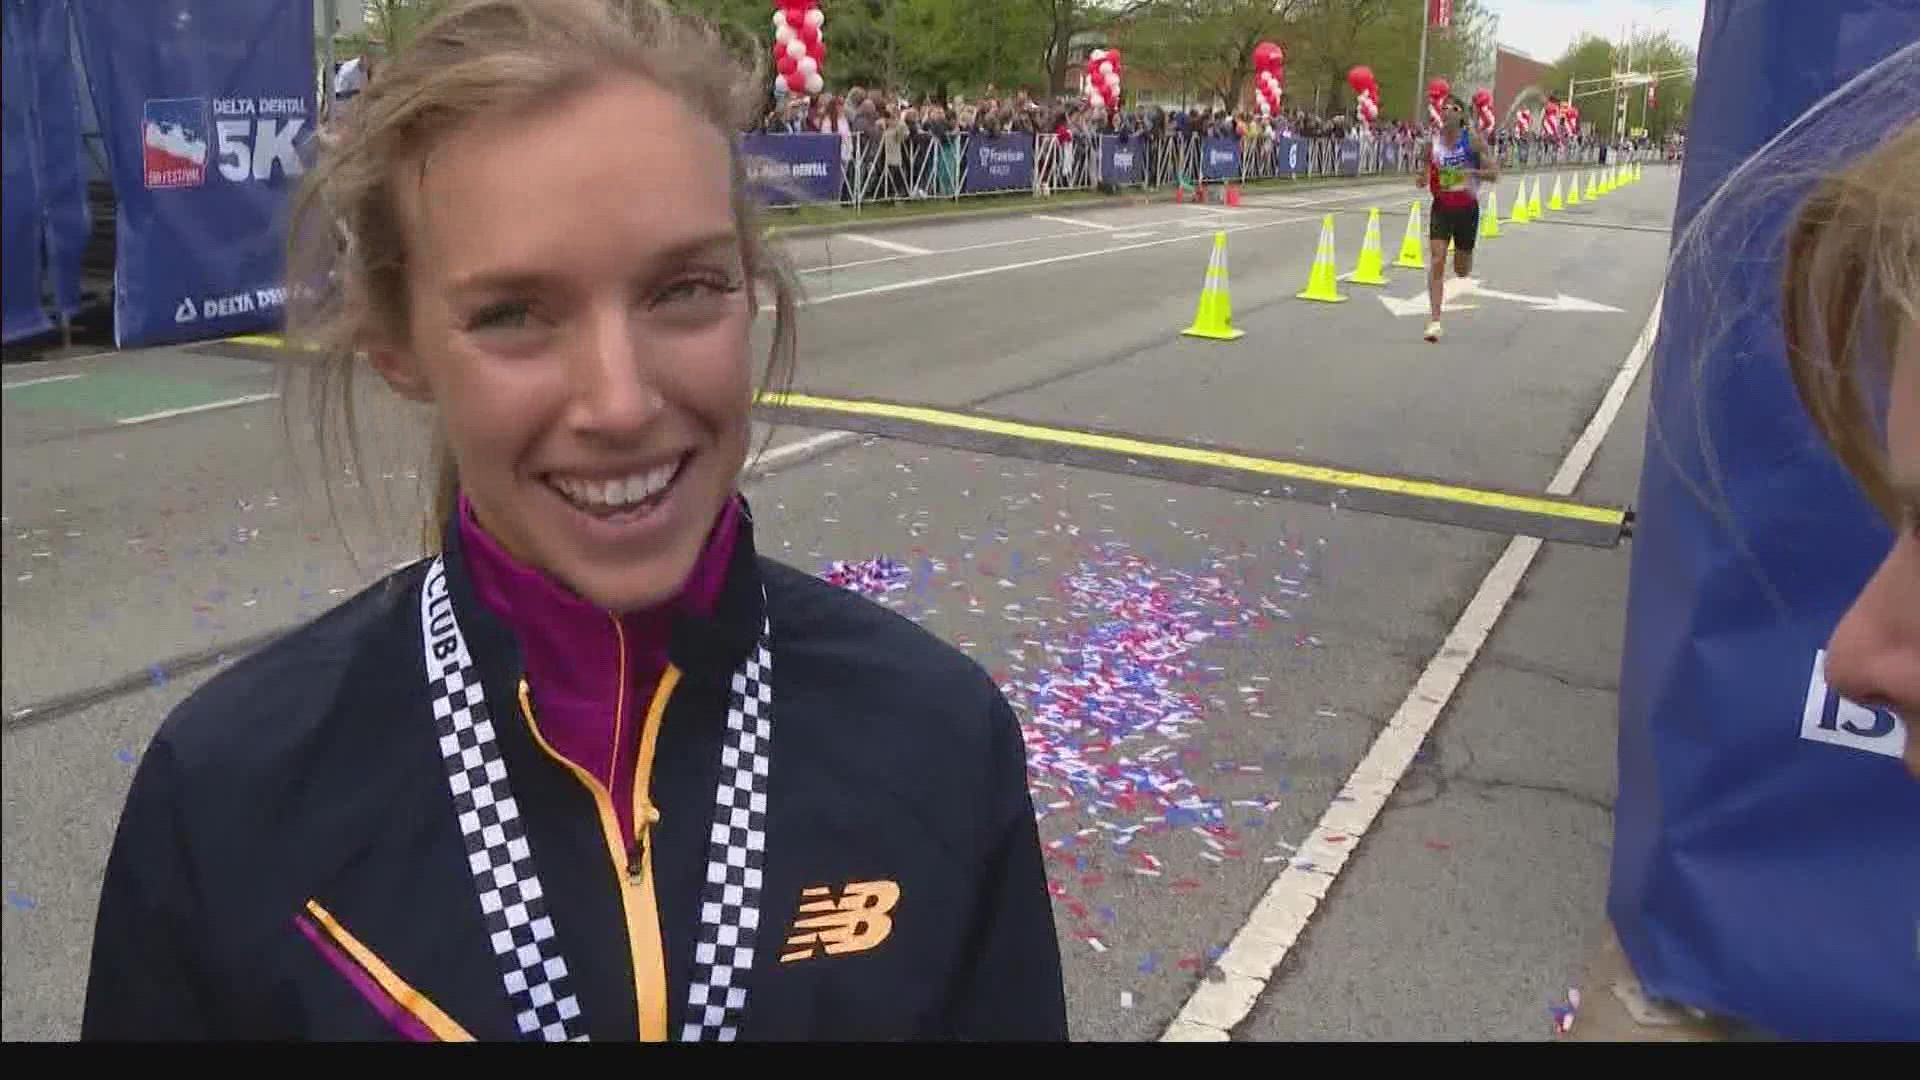 Olympian Emily Sisson won the Women's USATF road race portion of the Mini-Marathon in an American record 1:07.11.